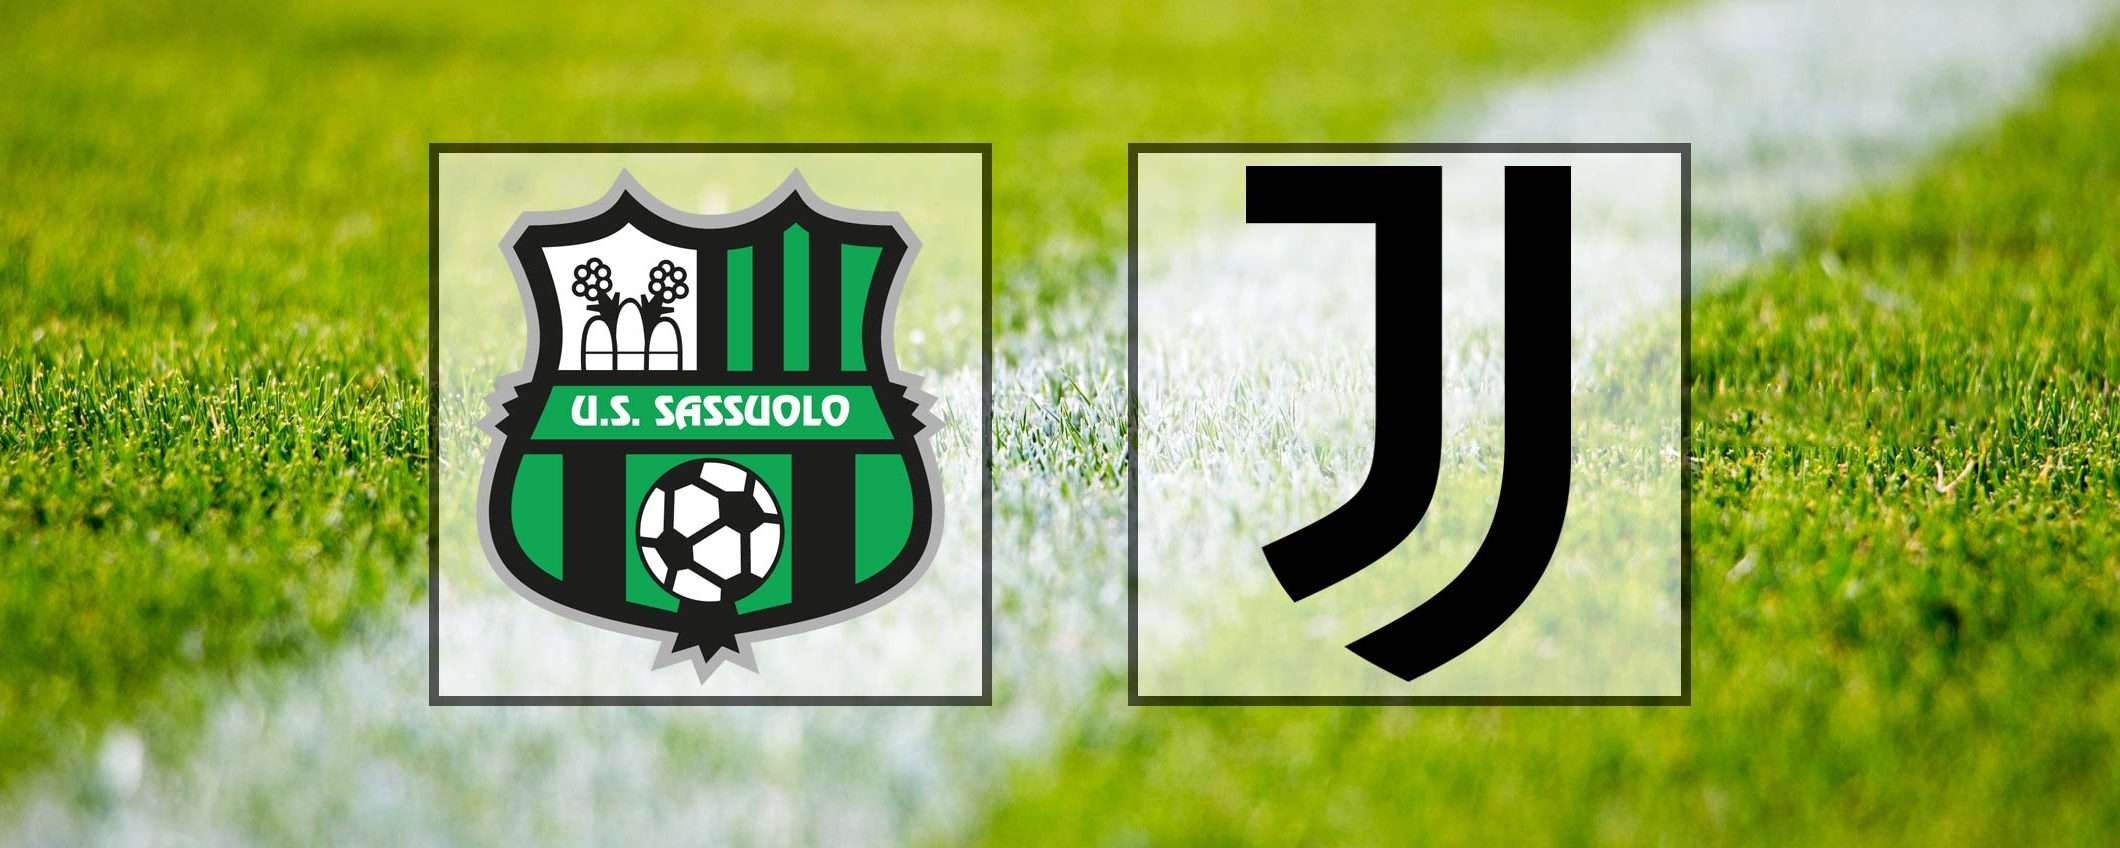 Come vedere Sassuolo-Juventus in streaming (Serie A)